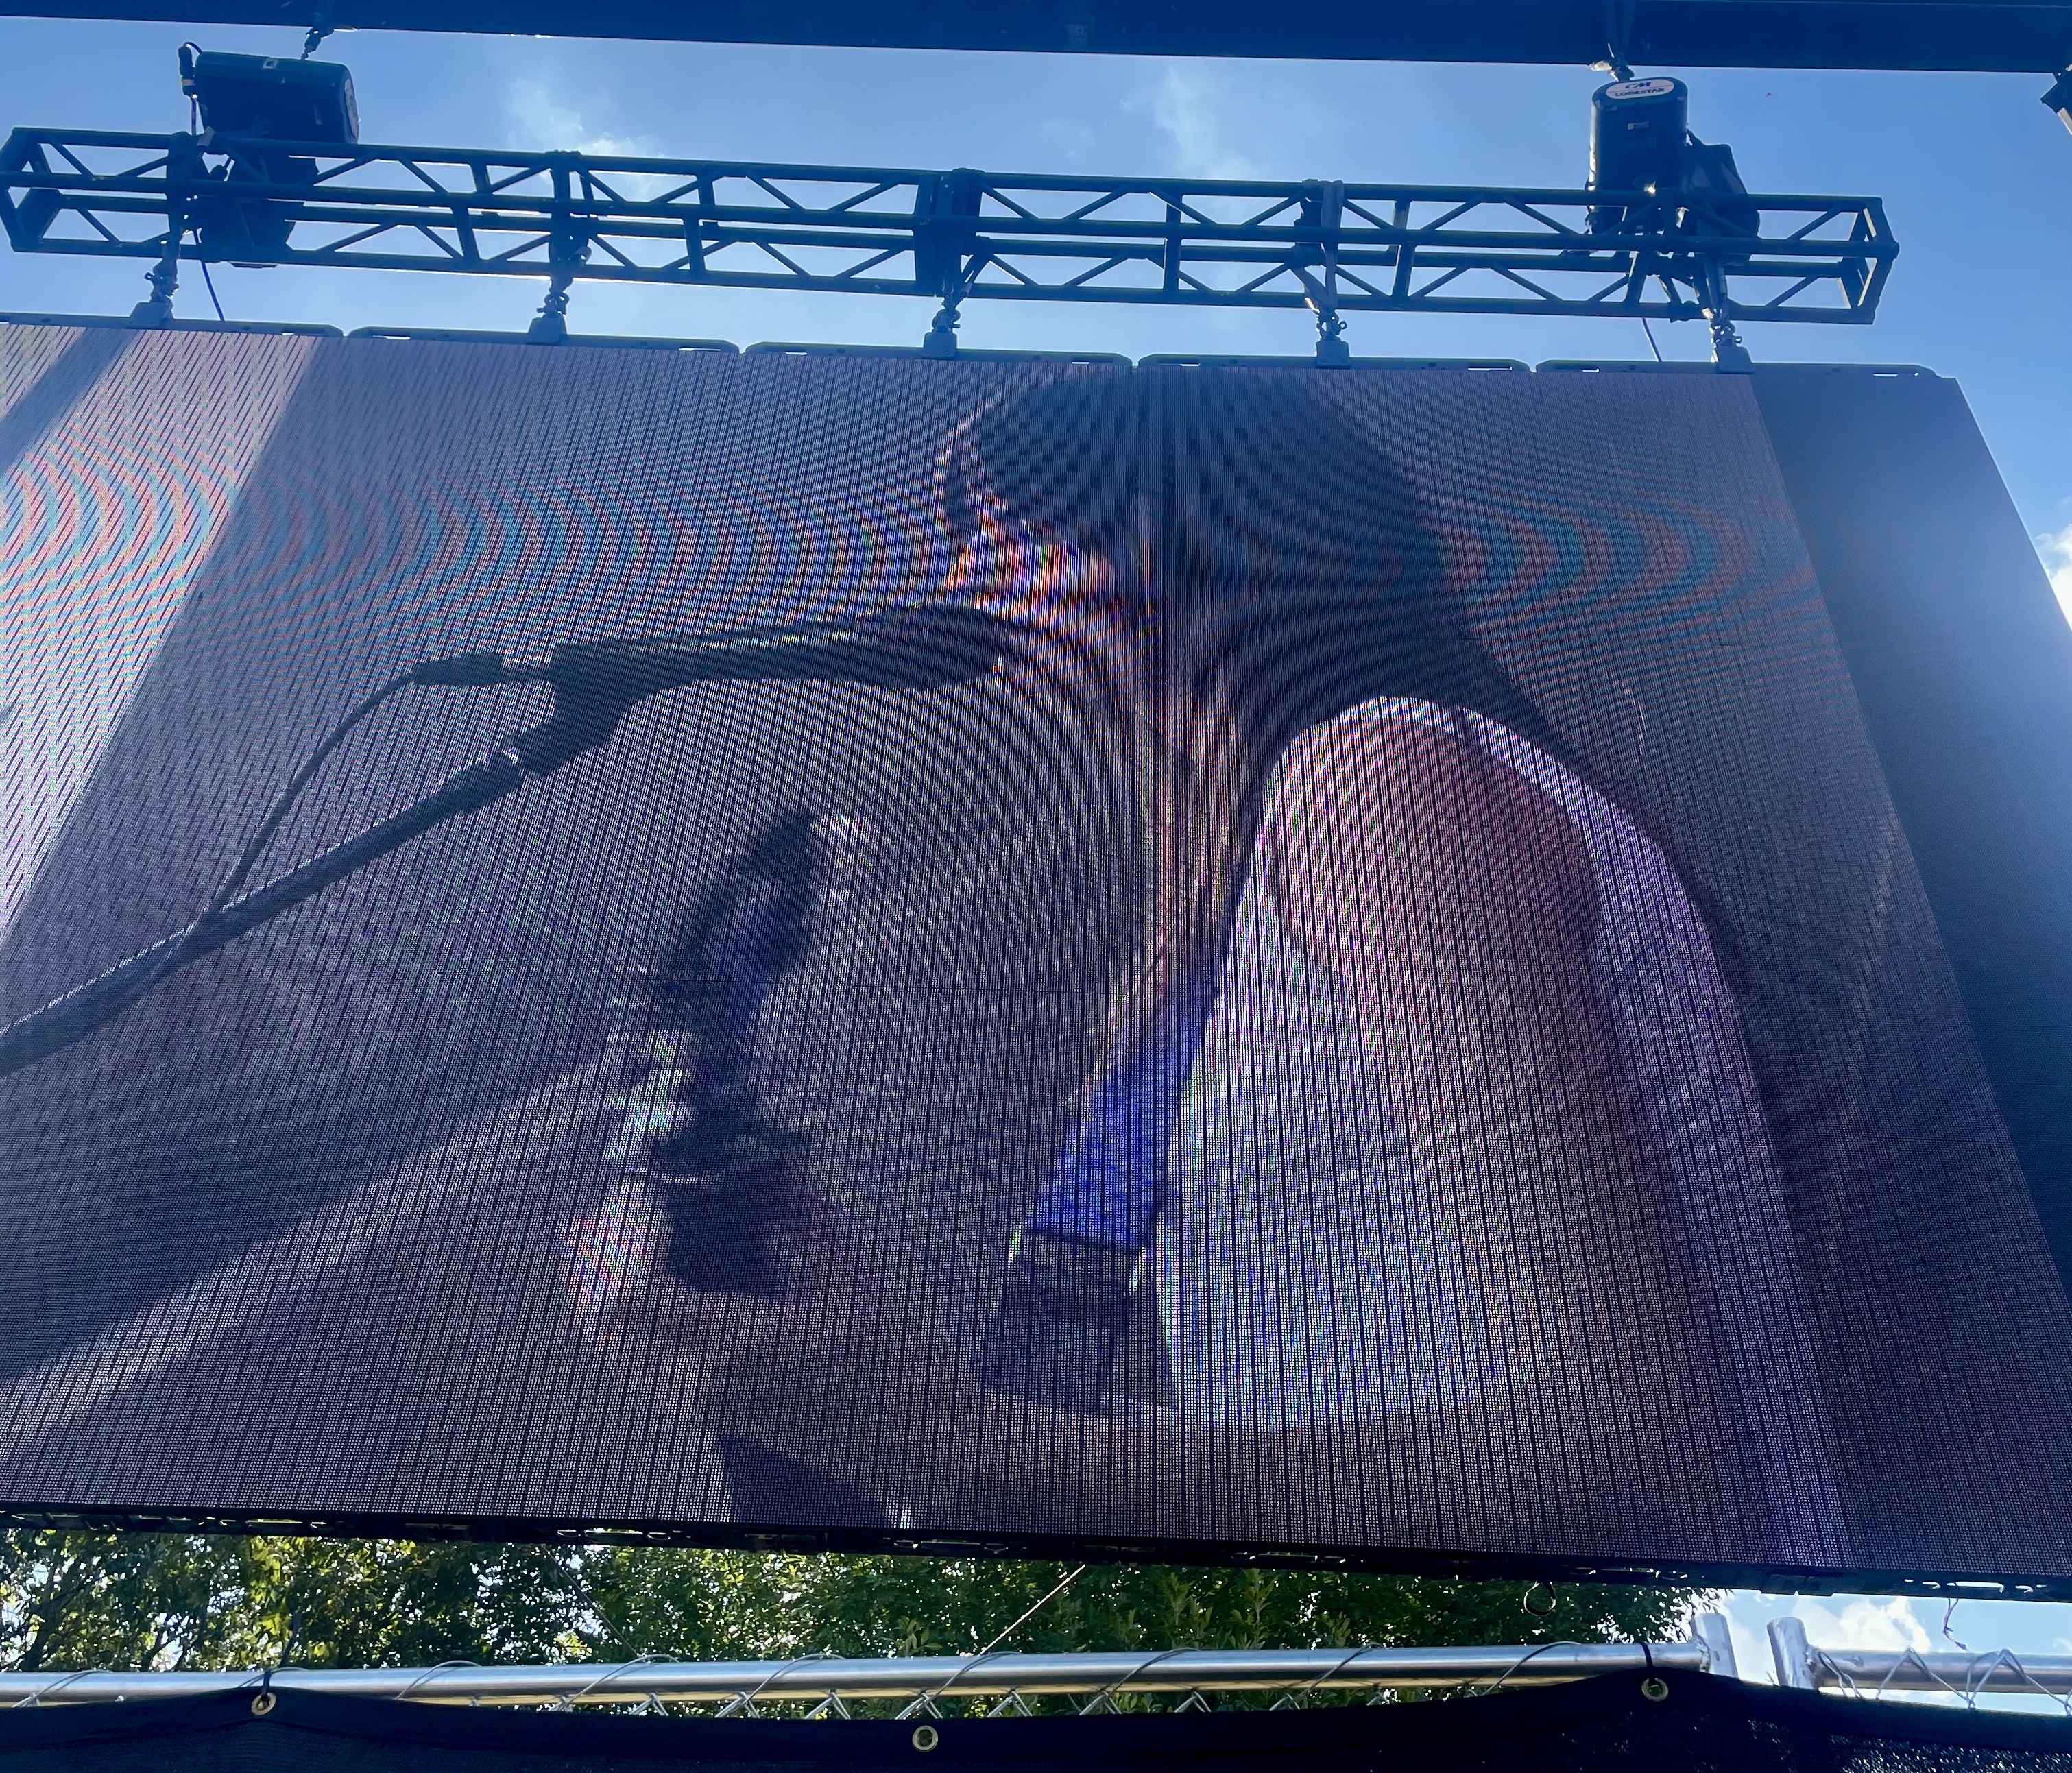 The image features Faye Webster on screen at the Barton Springs stage. She is singing into the microphone while playing the guitar. The screen is slightly distorted from the camera lens. 